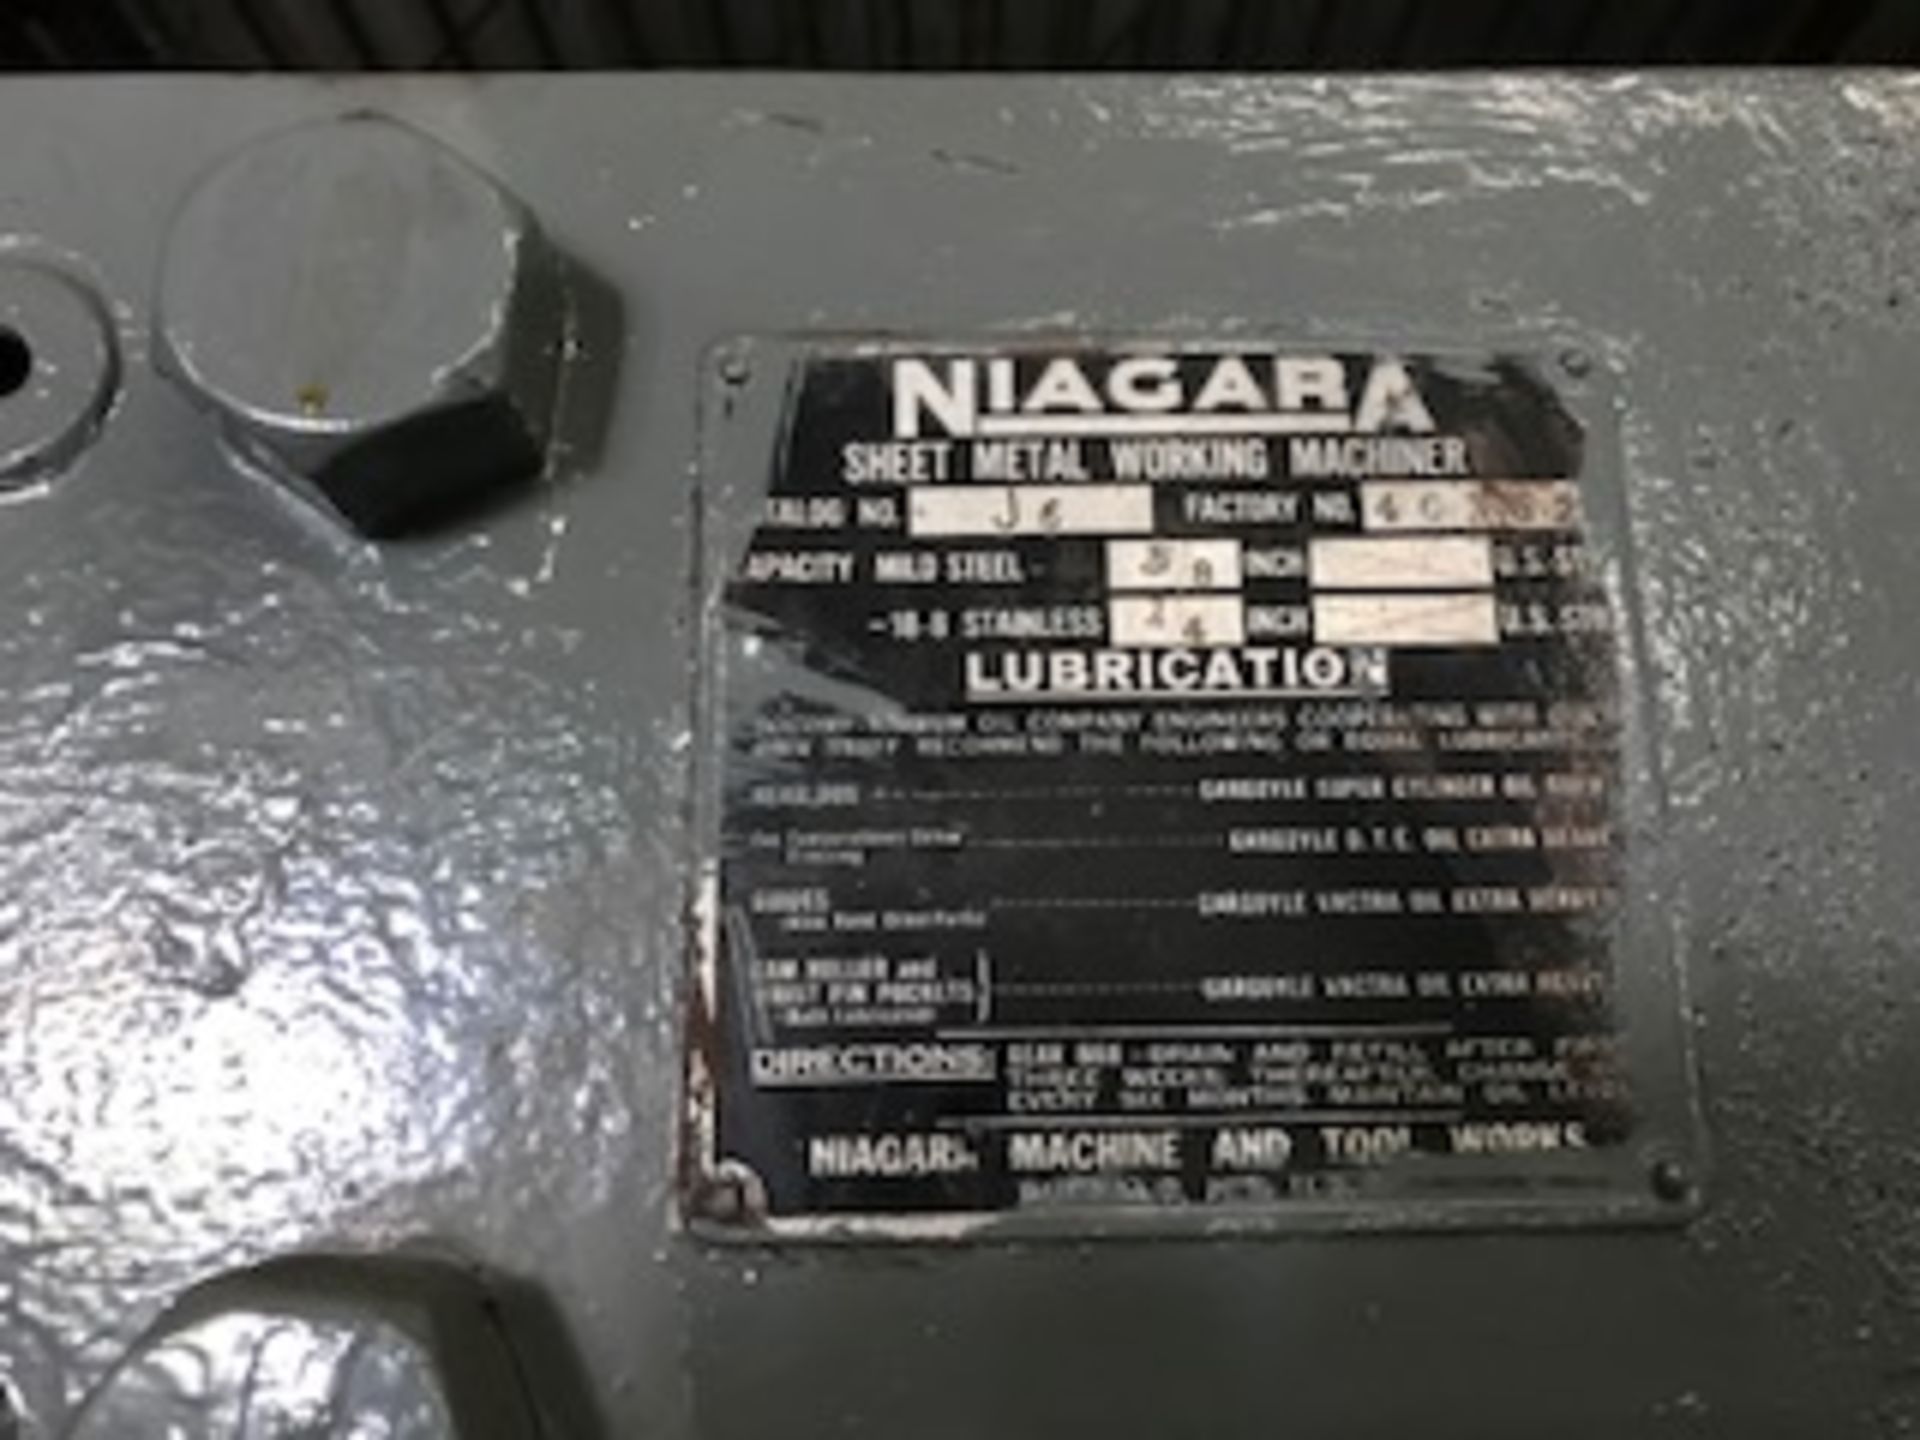 NIAGRA J6 SHEAR - FACTORY #40162 - 76.5" JAW / 91" TABLE / MILD STEEL 3/8" / 8-8 STAINLESS 1/4" - Image 2 of 7